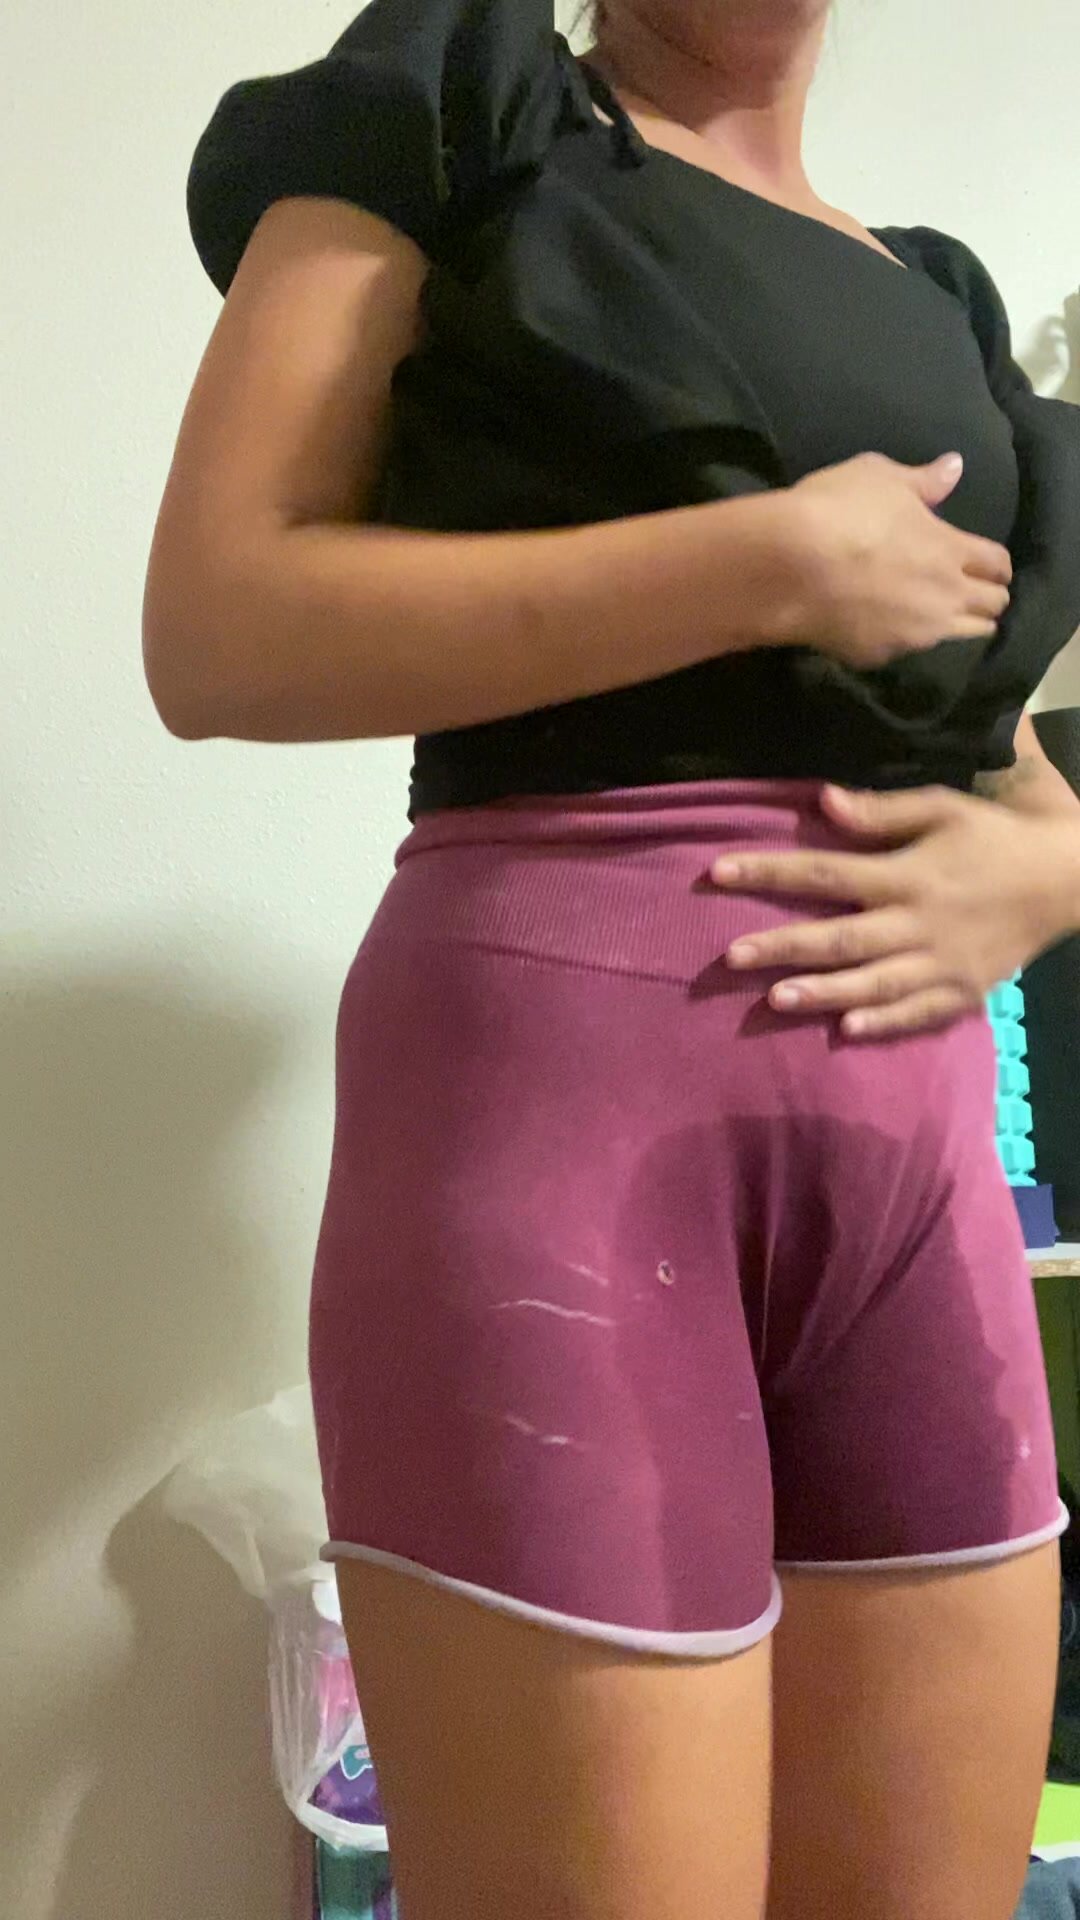 Leaking all day and wetting in her car twice aftermath